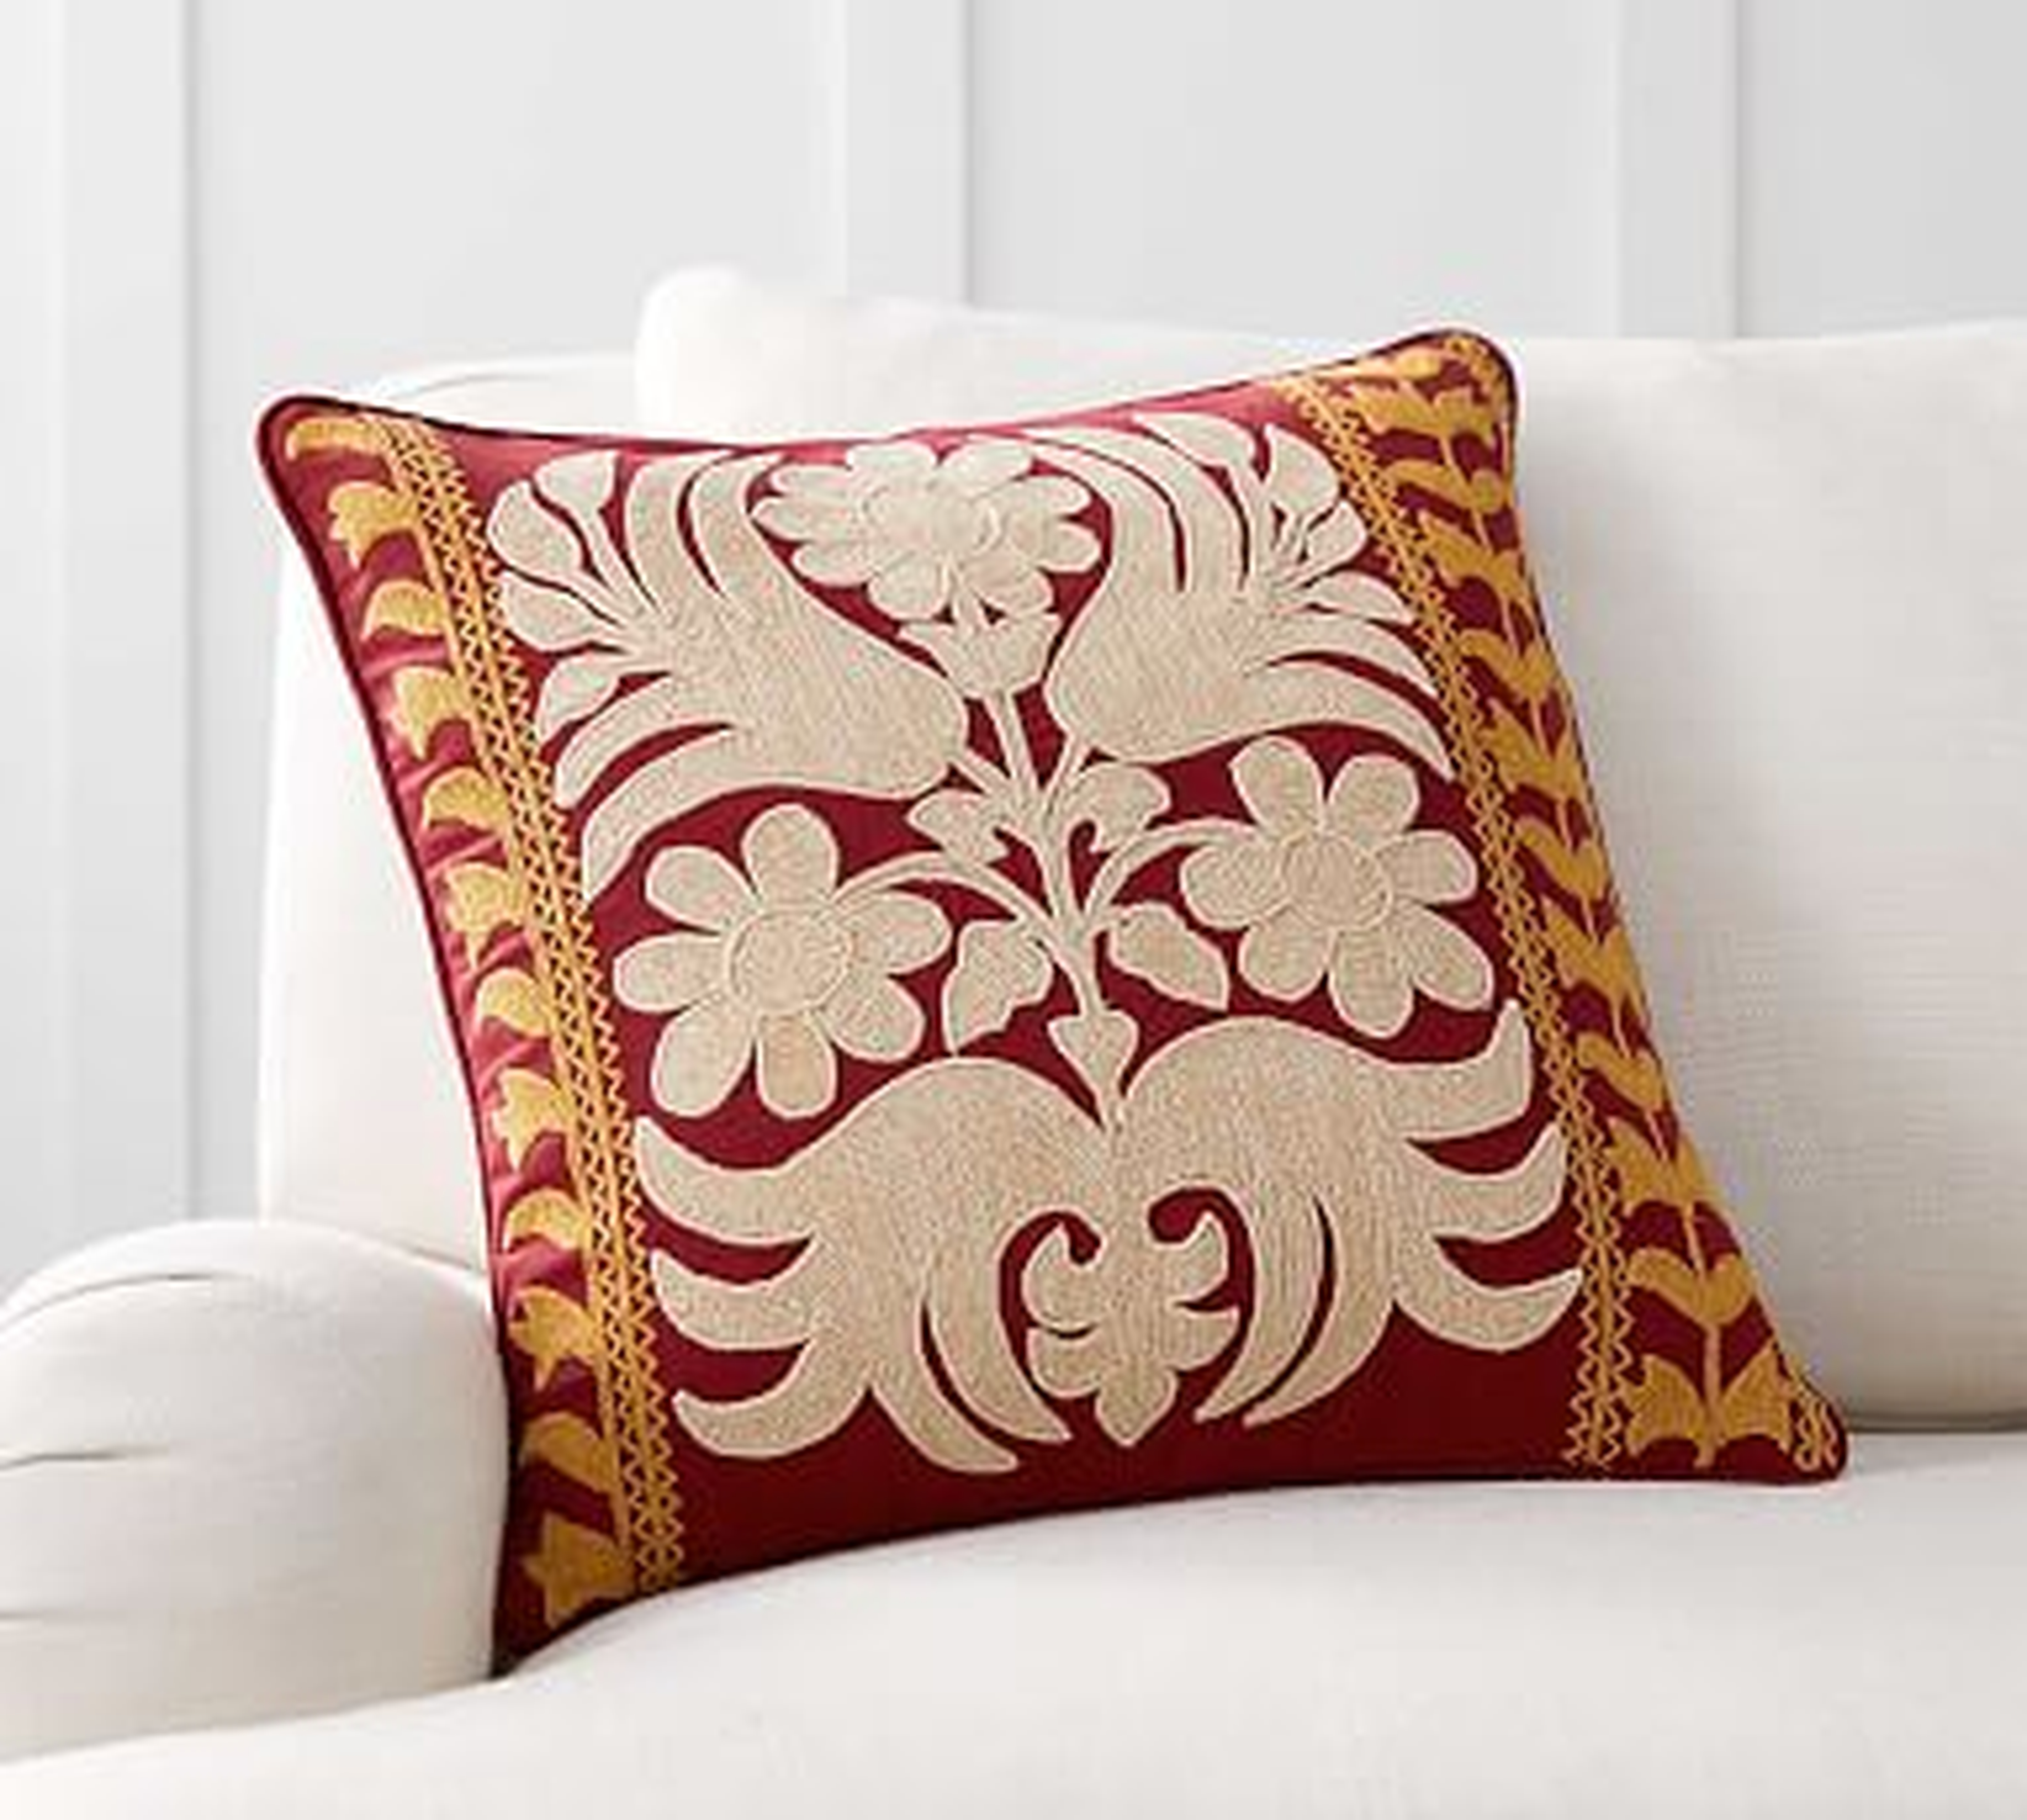 Bremen Embroidered Pillow Cover, 18", Red Multi - Pottery Barn